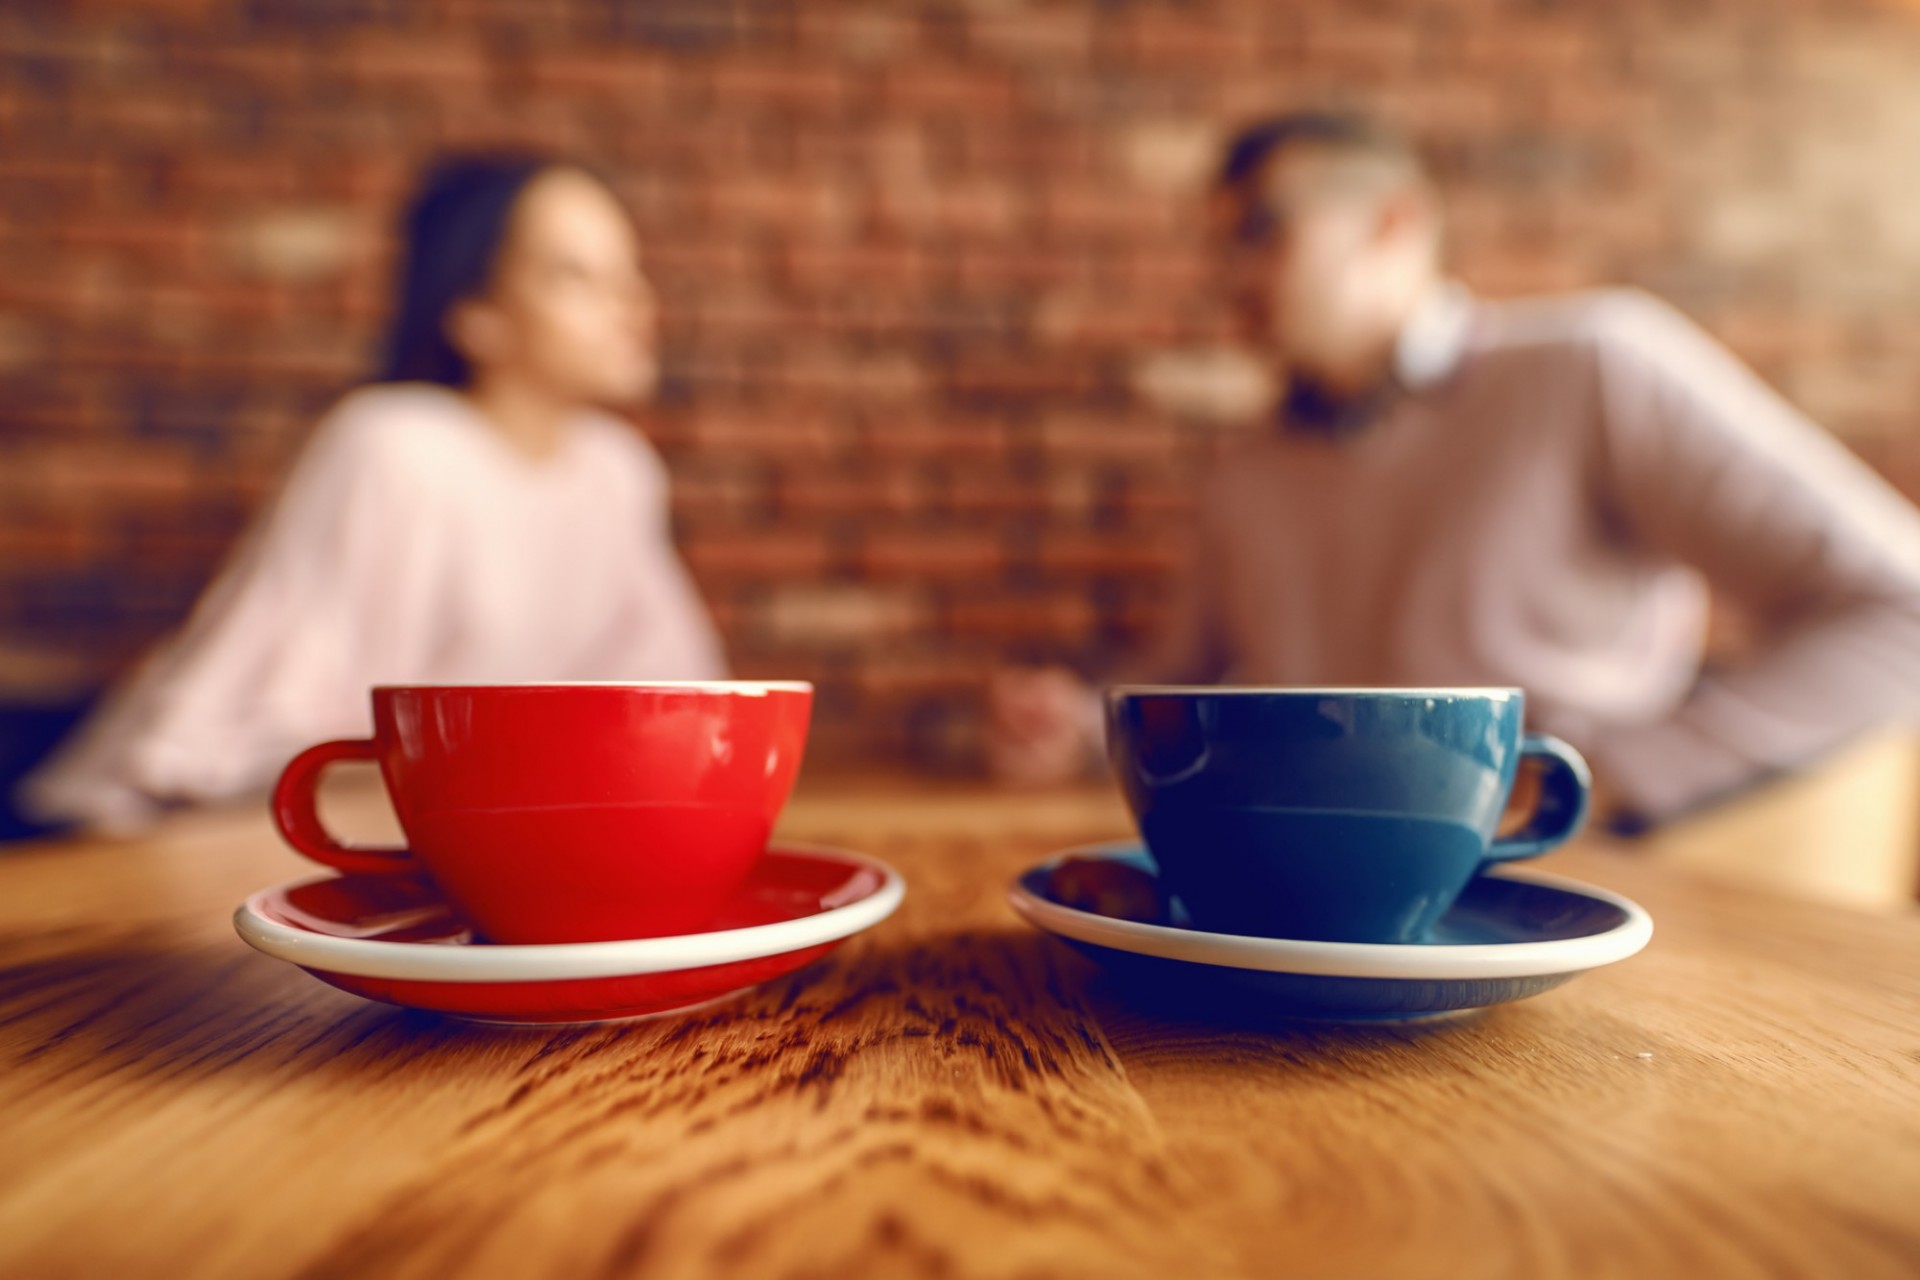 Two people having a conversation and two coffee cups